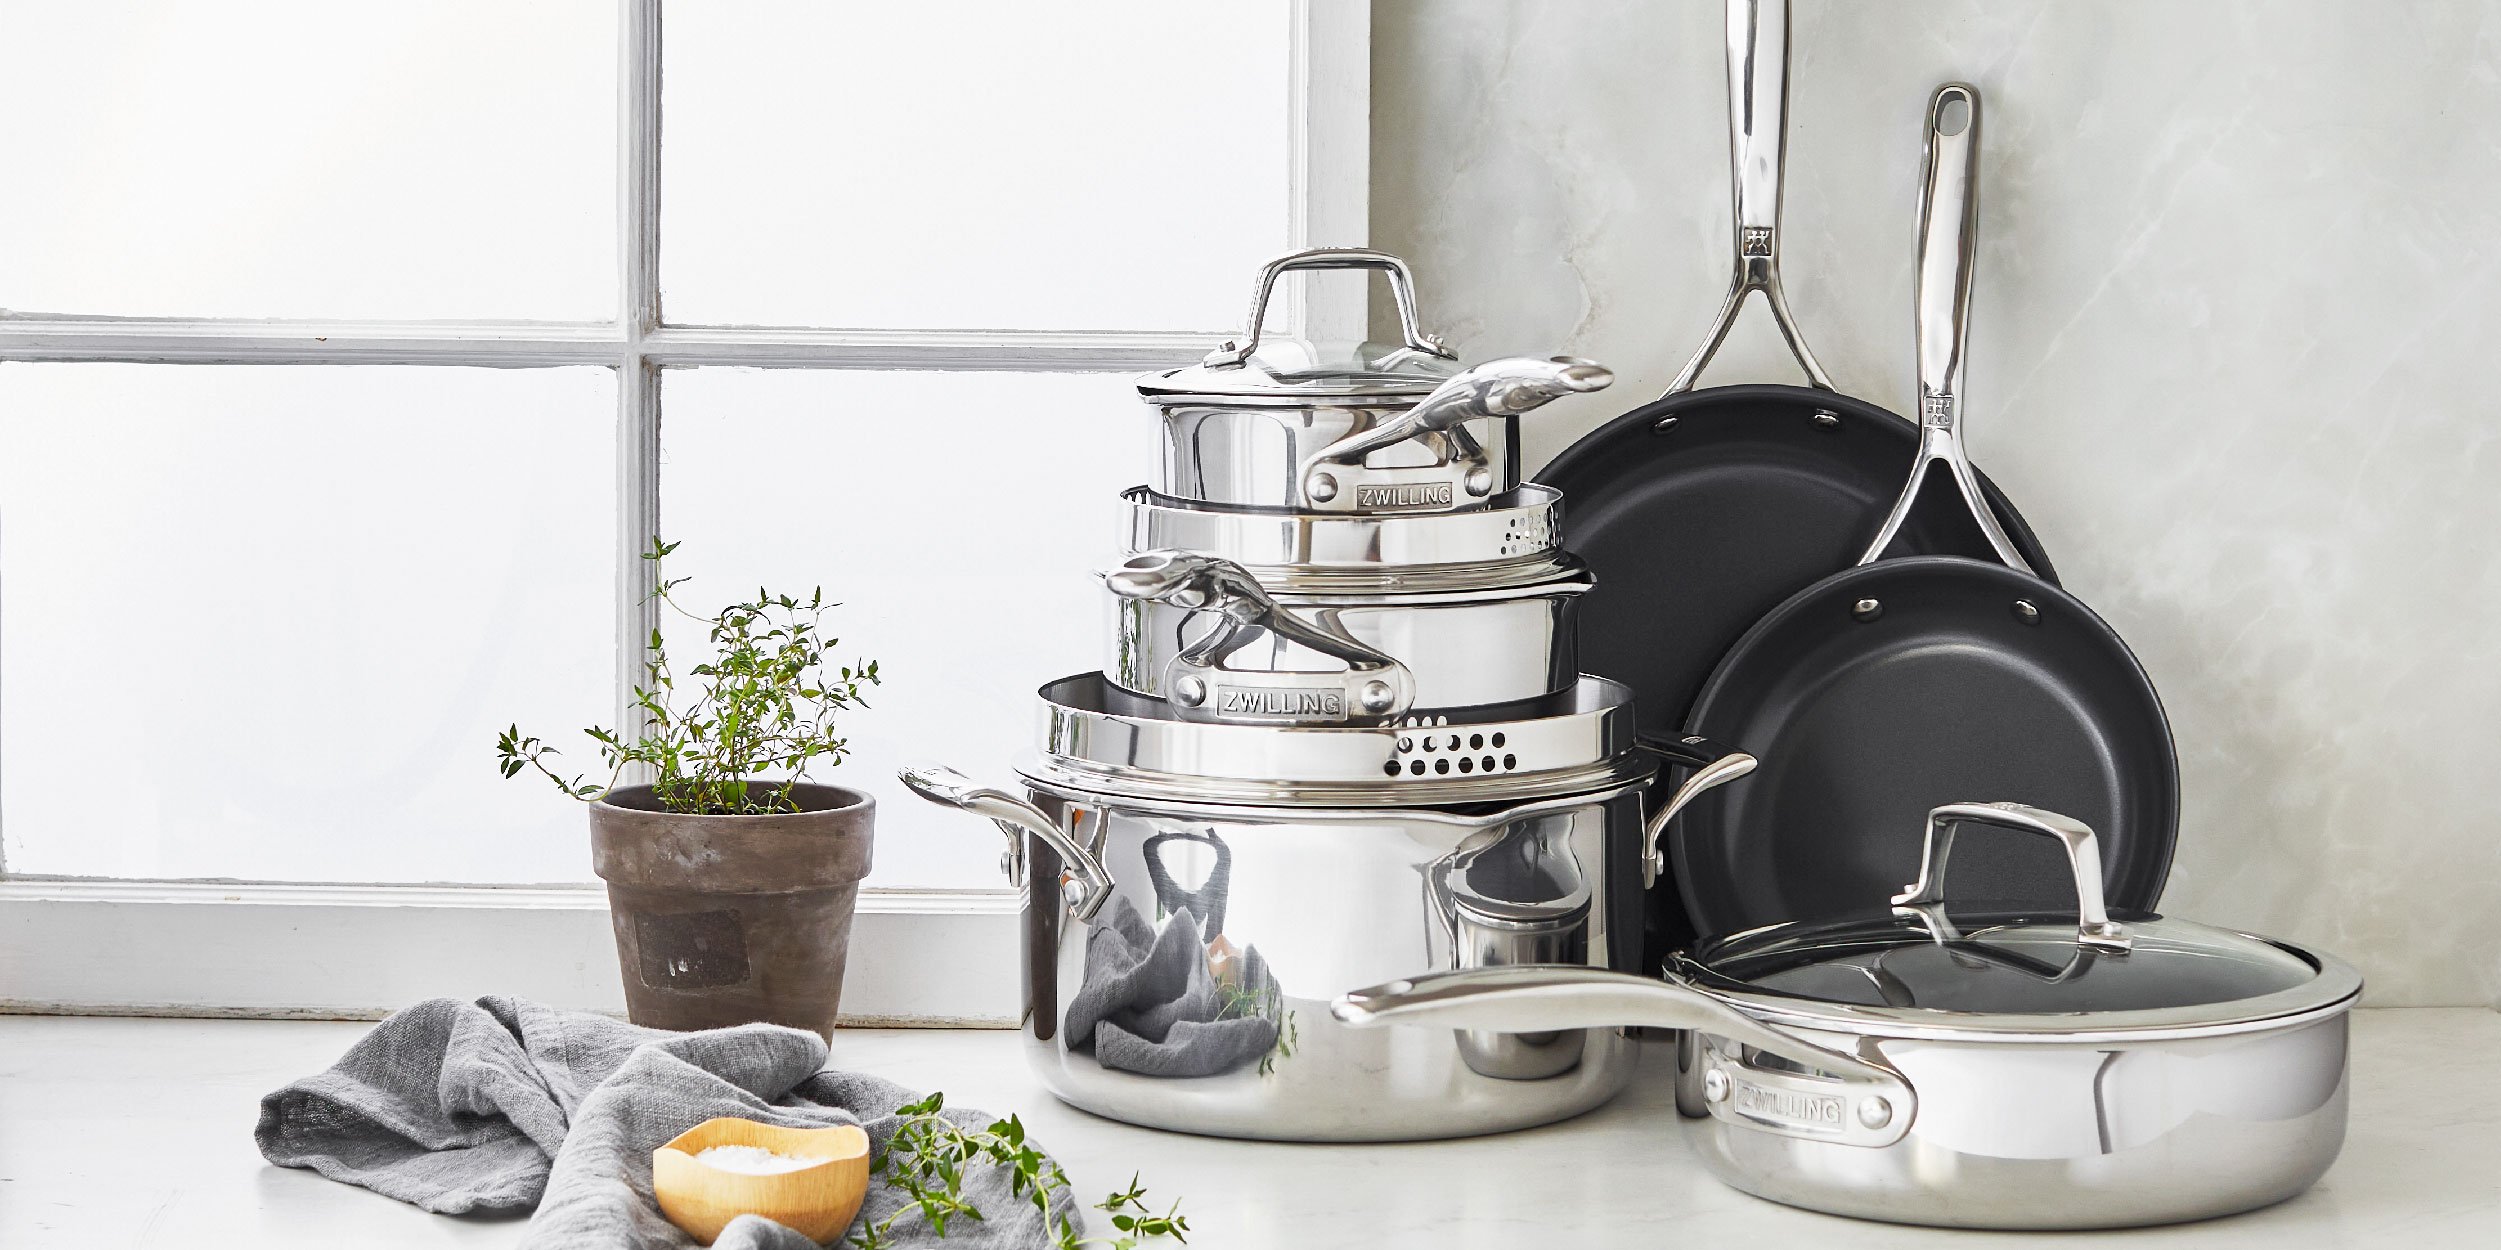 https://www.zwilling.com/on/demandware.static/-/Sites-zwilling-us-Library/default/dw87955414/images/product-content/masonry-content/zwilling/cookware/energy-plus/ZW_EnergyPlus_Masonr_1200-600.jpg